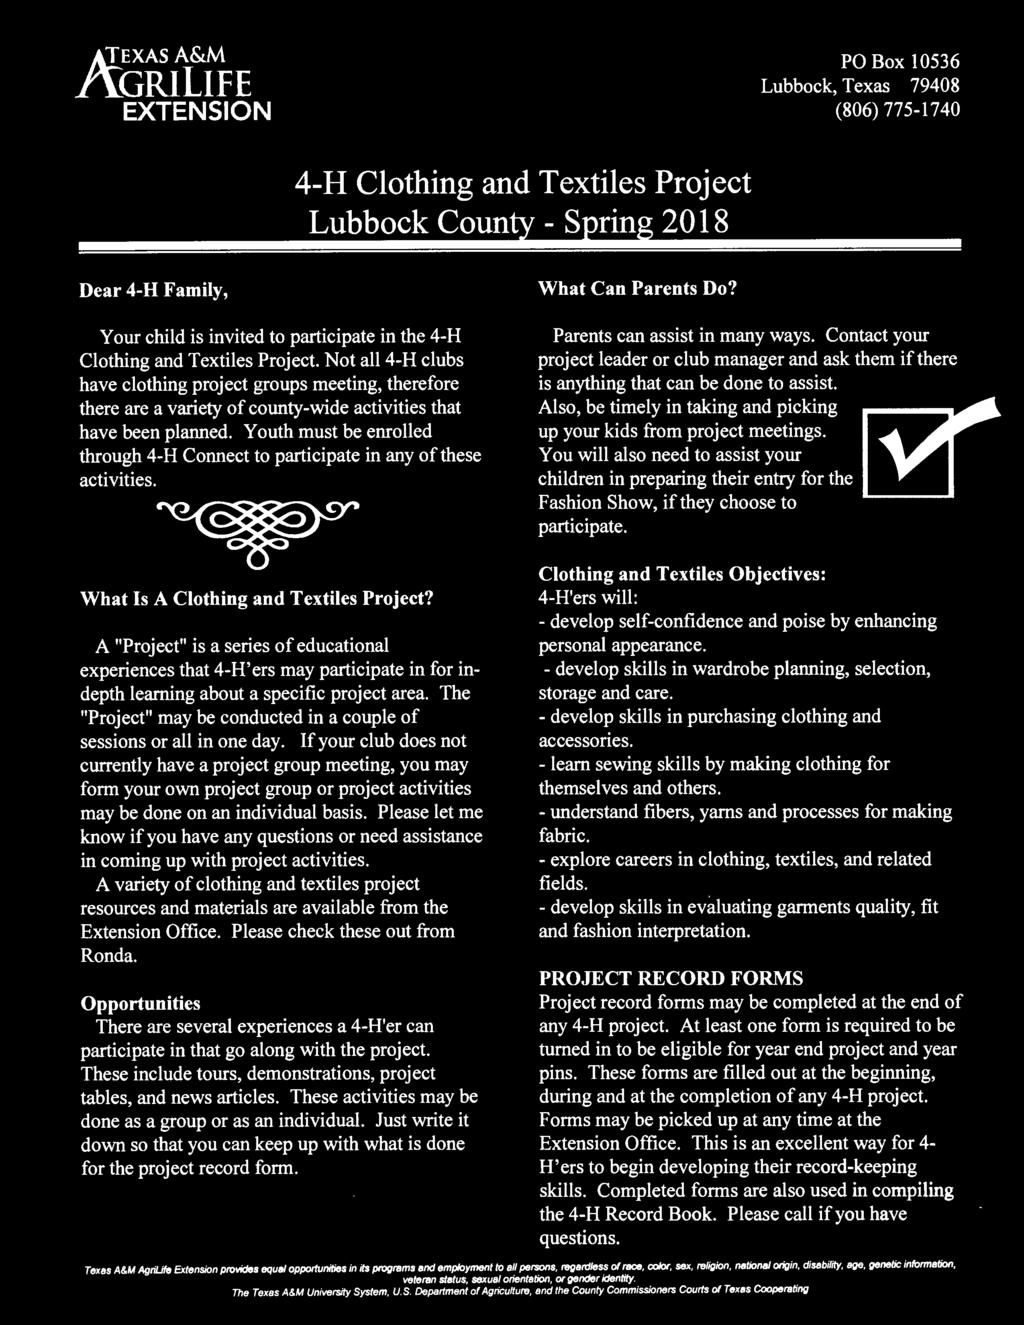 Youth must be enrolled through 4-H Connect to participate in any of these activities. What Is A Clothing and Textiles Project?